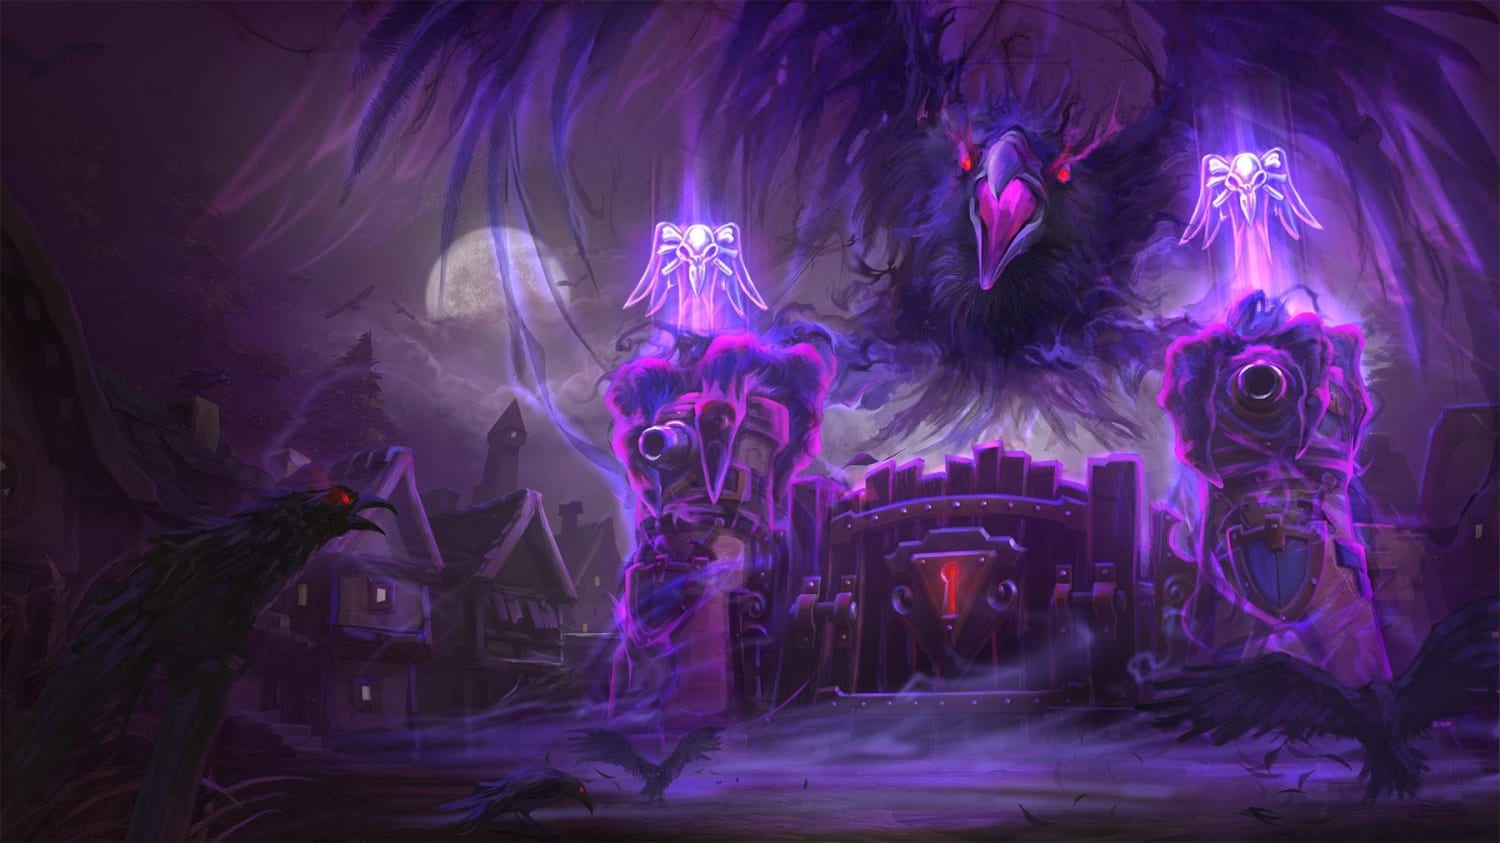 Could a Heroes of the Storm revival be in the works?